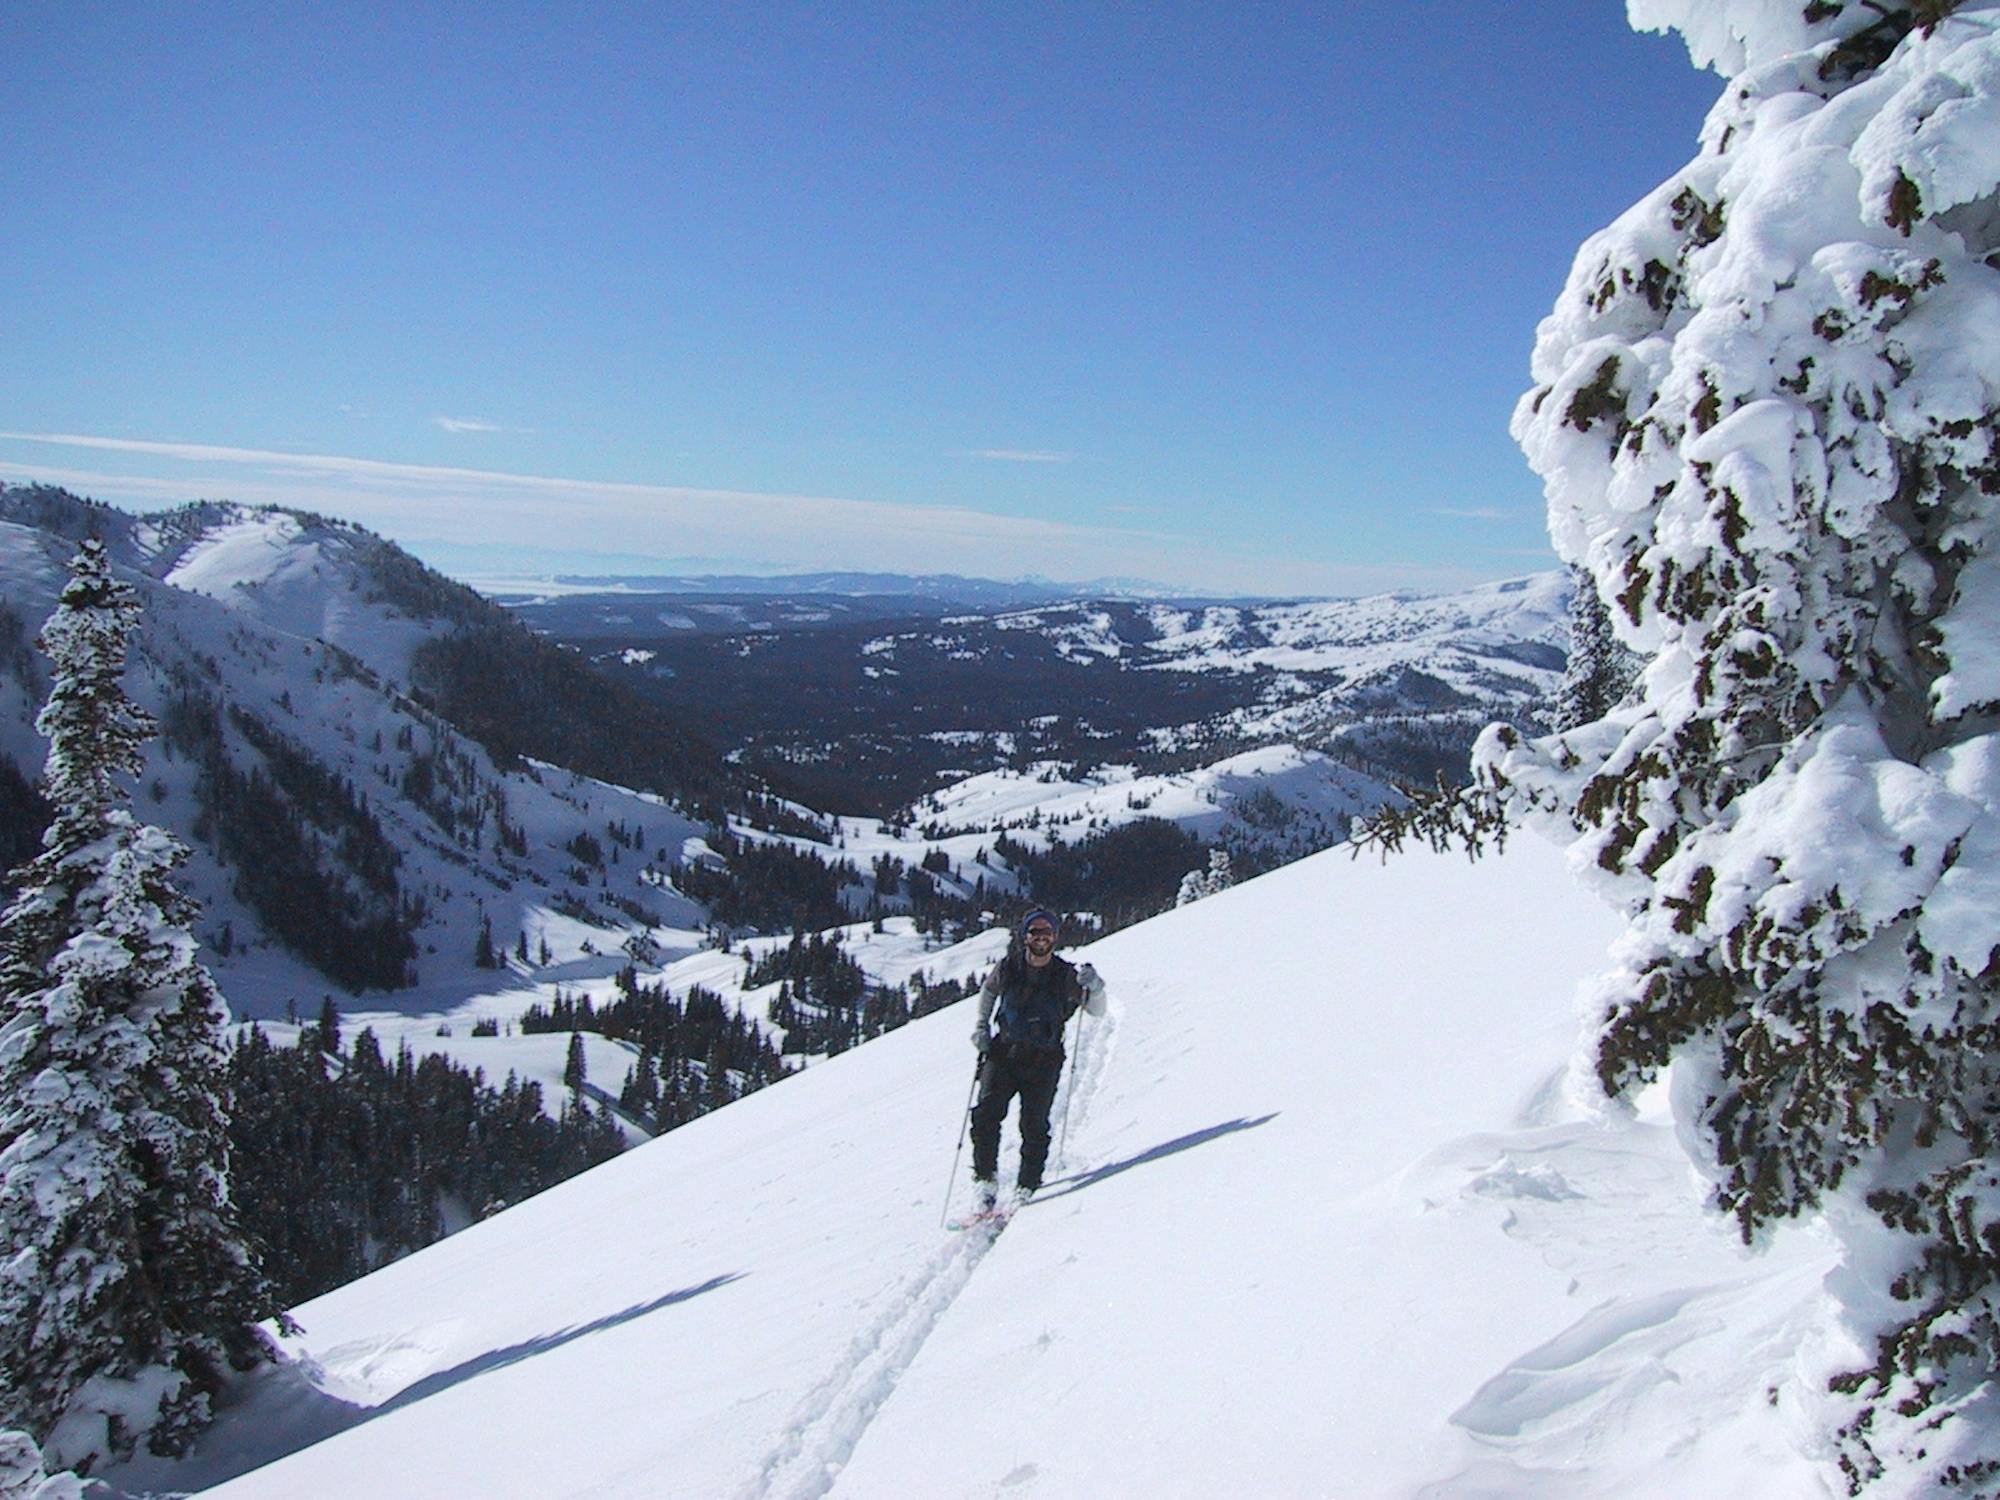 BLM Winter Bucket List #20: Centennial Mountains Wilderness Study Area, Montana, for Back Country Skiing